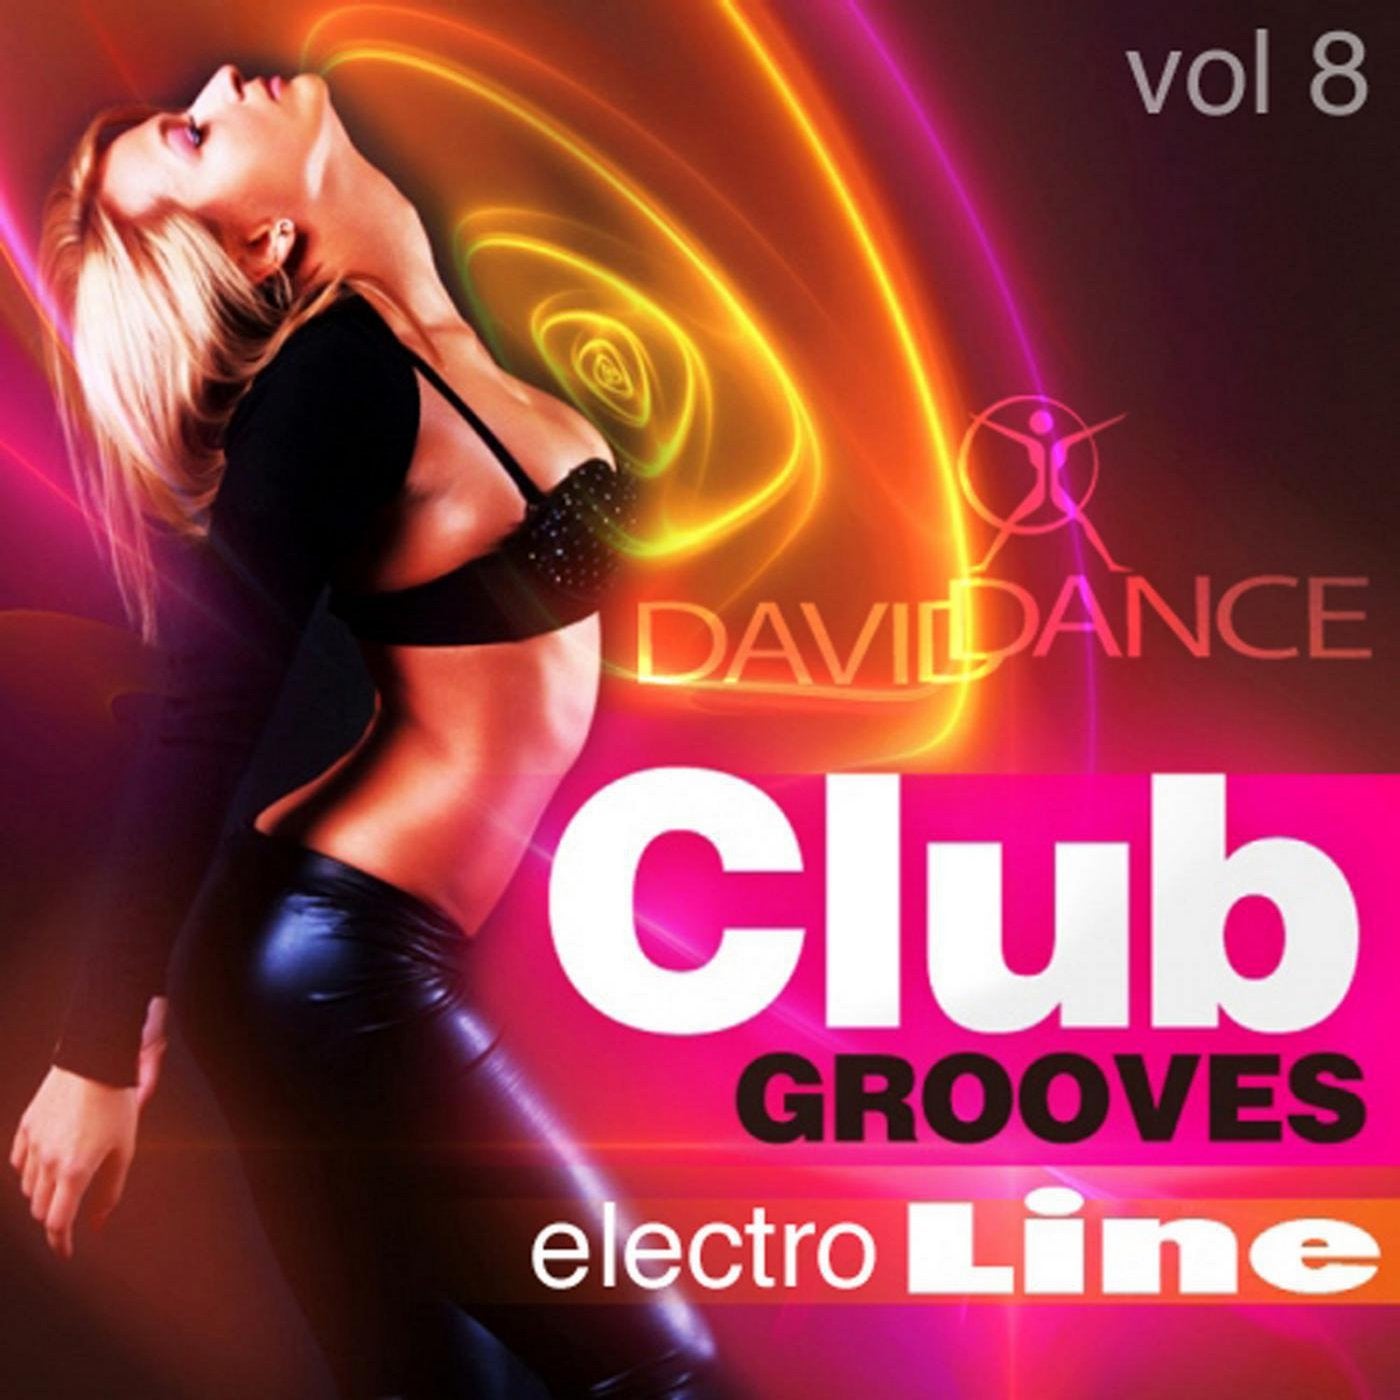 CLUB GROOVES - ELECTRO LINE Vol 8